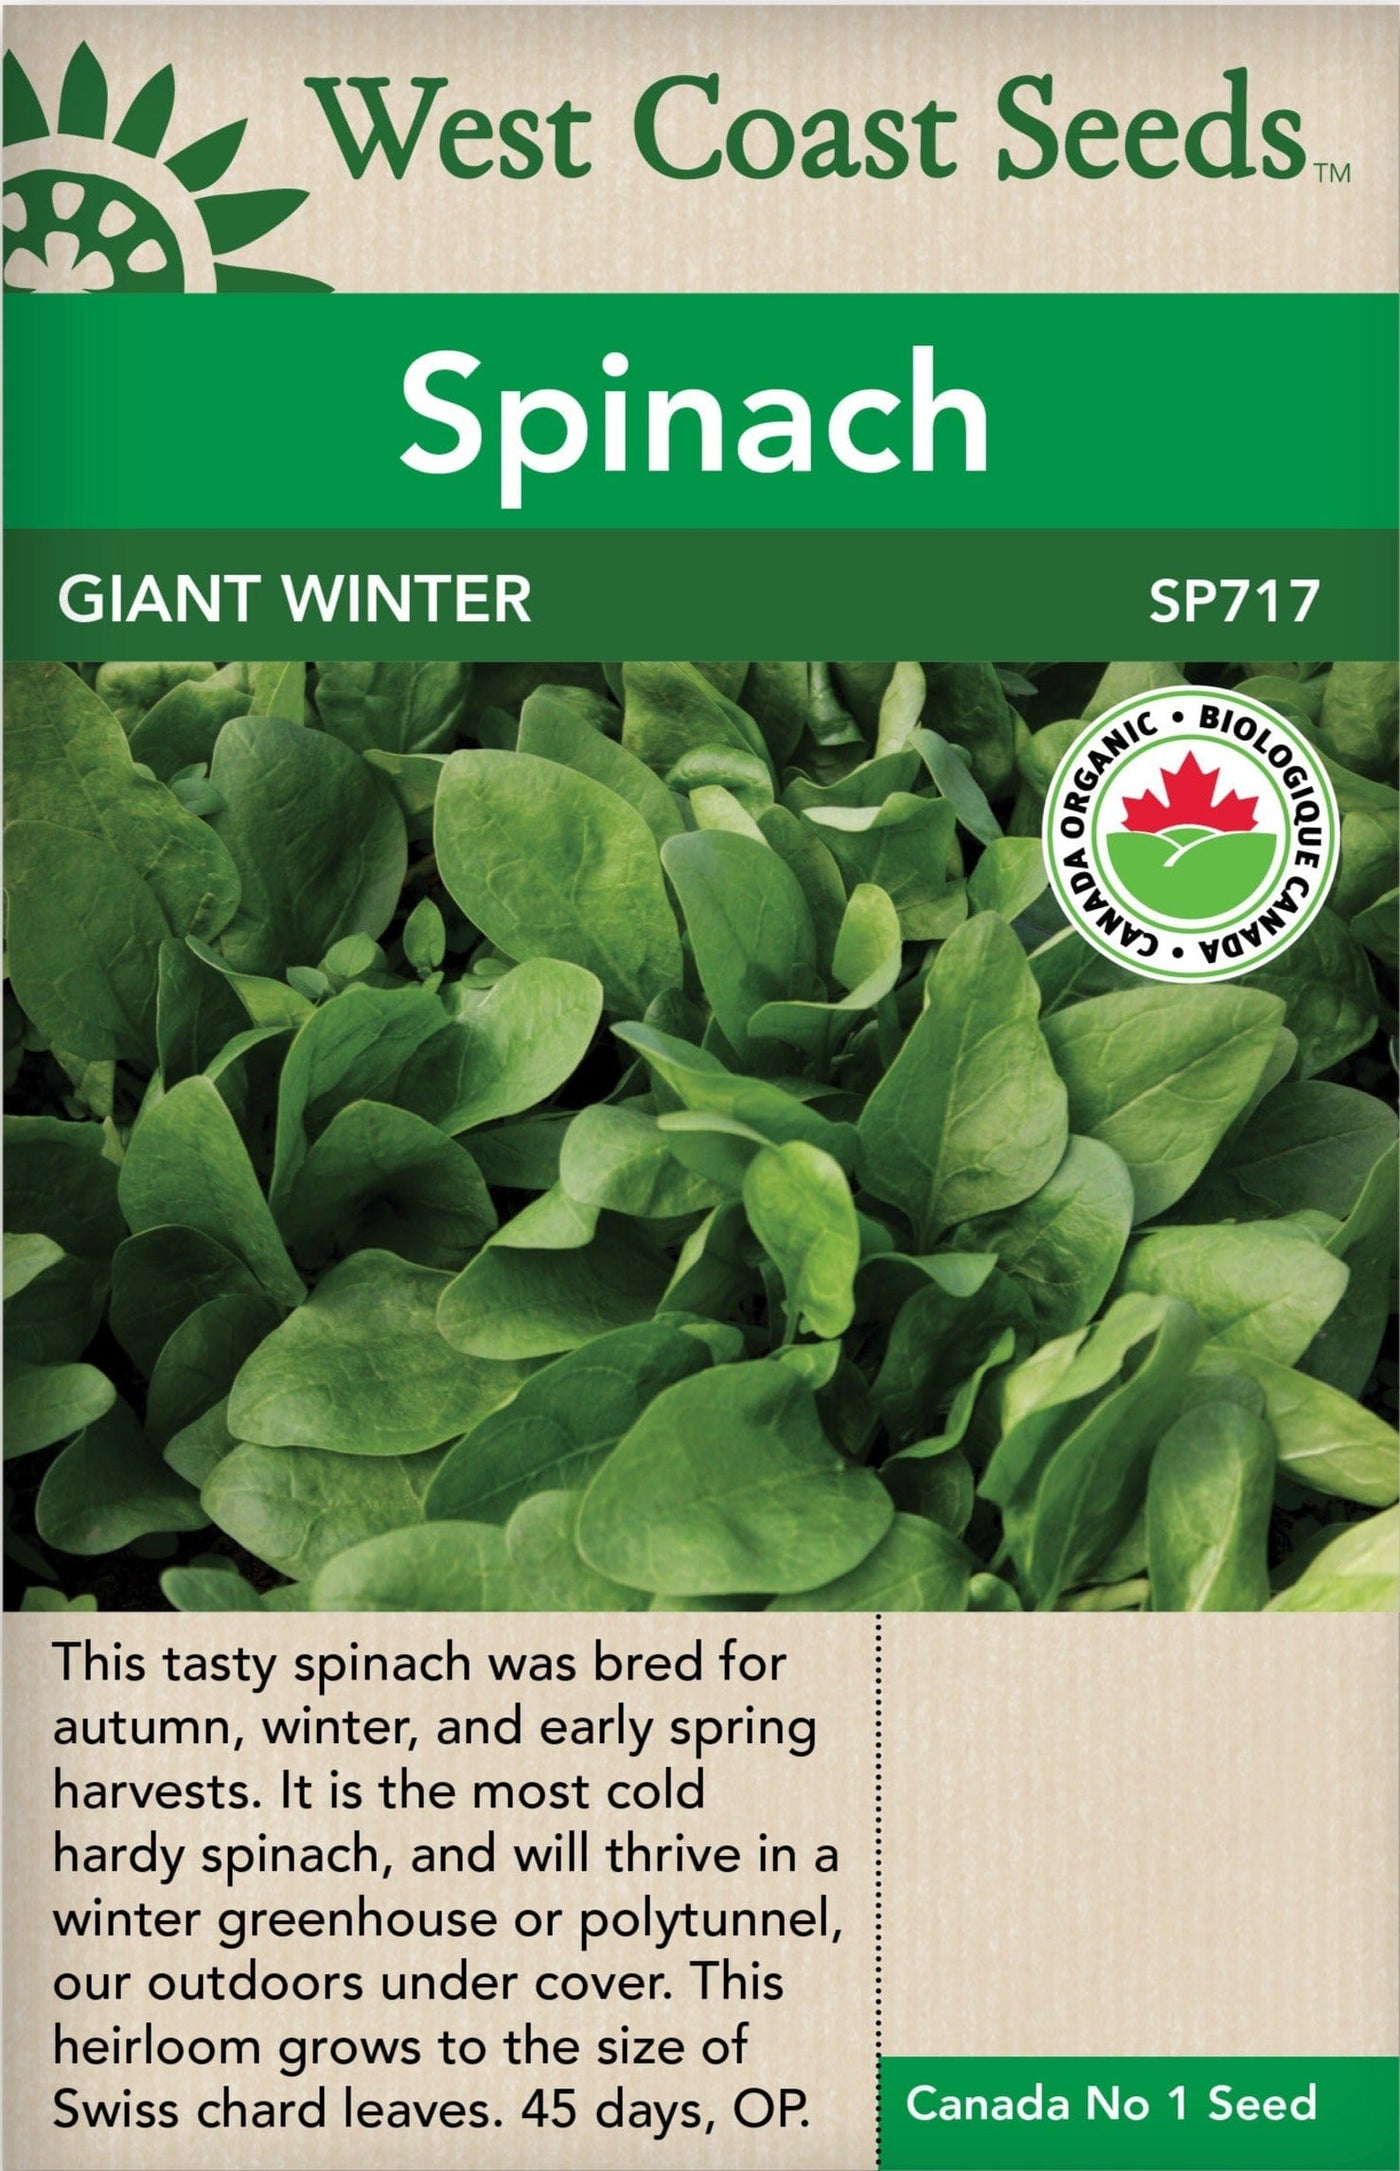 Organic Spinach Giant Winter - West Coast Seeds